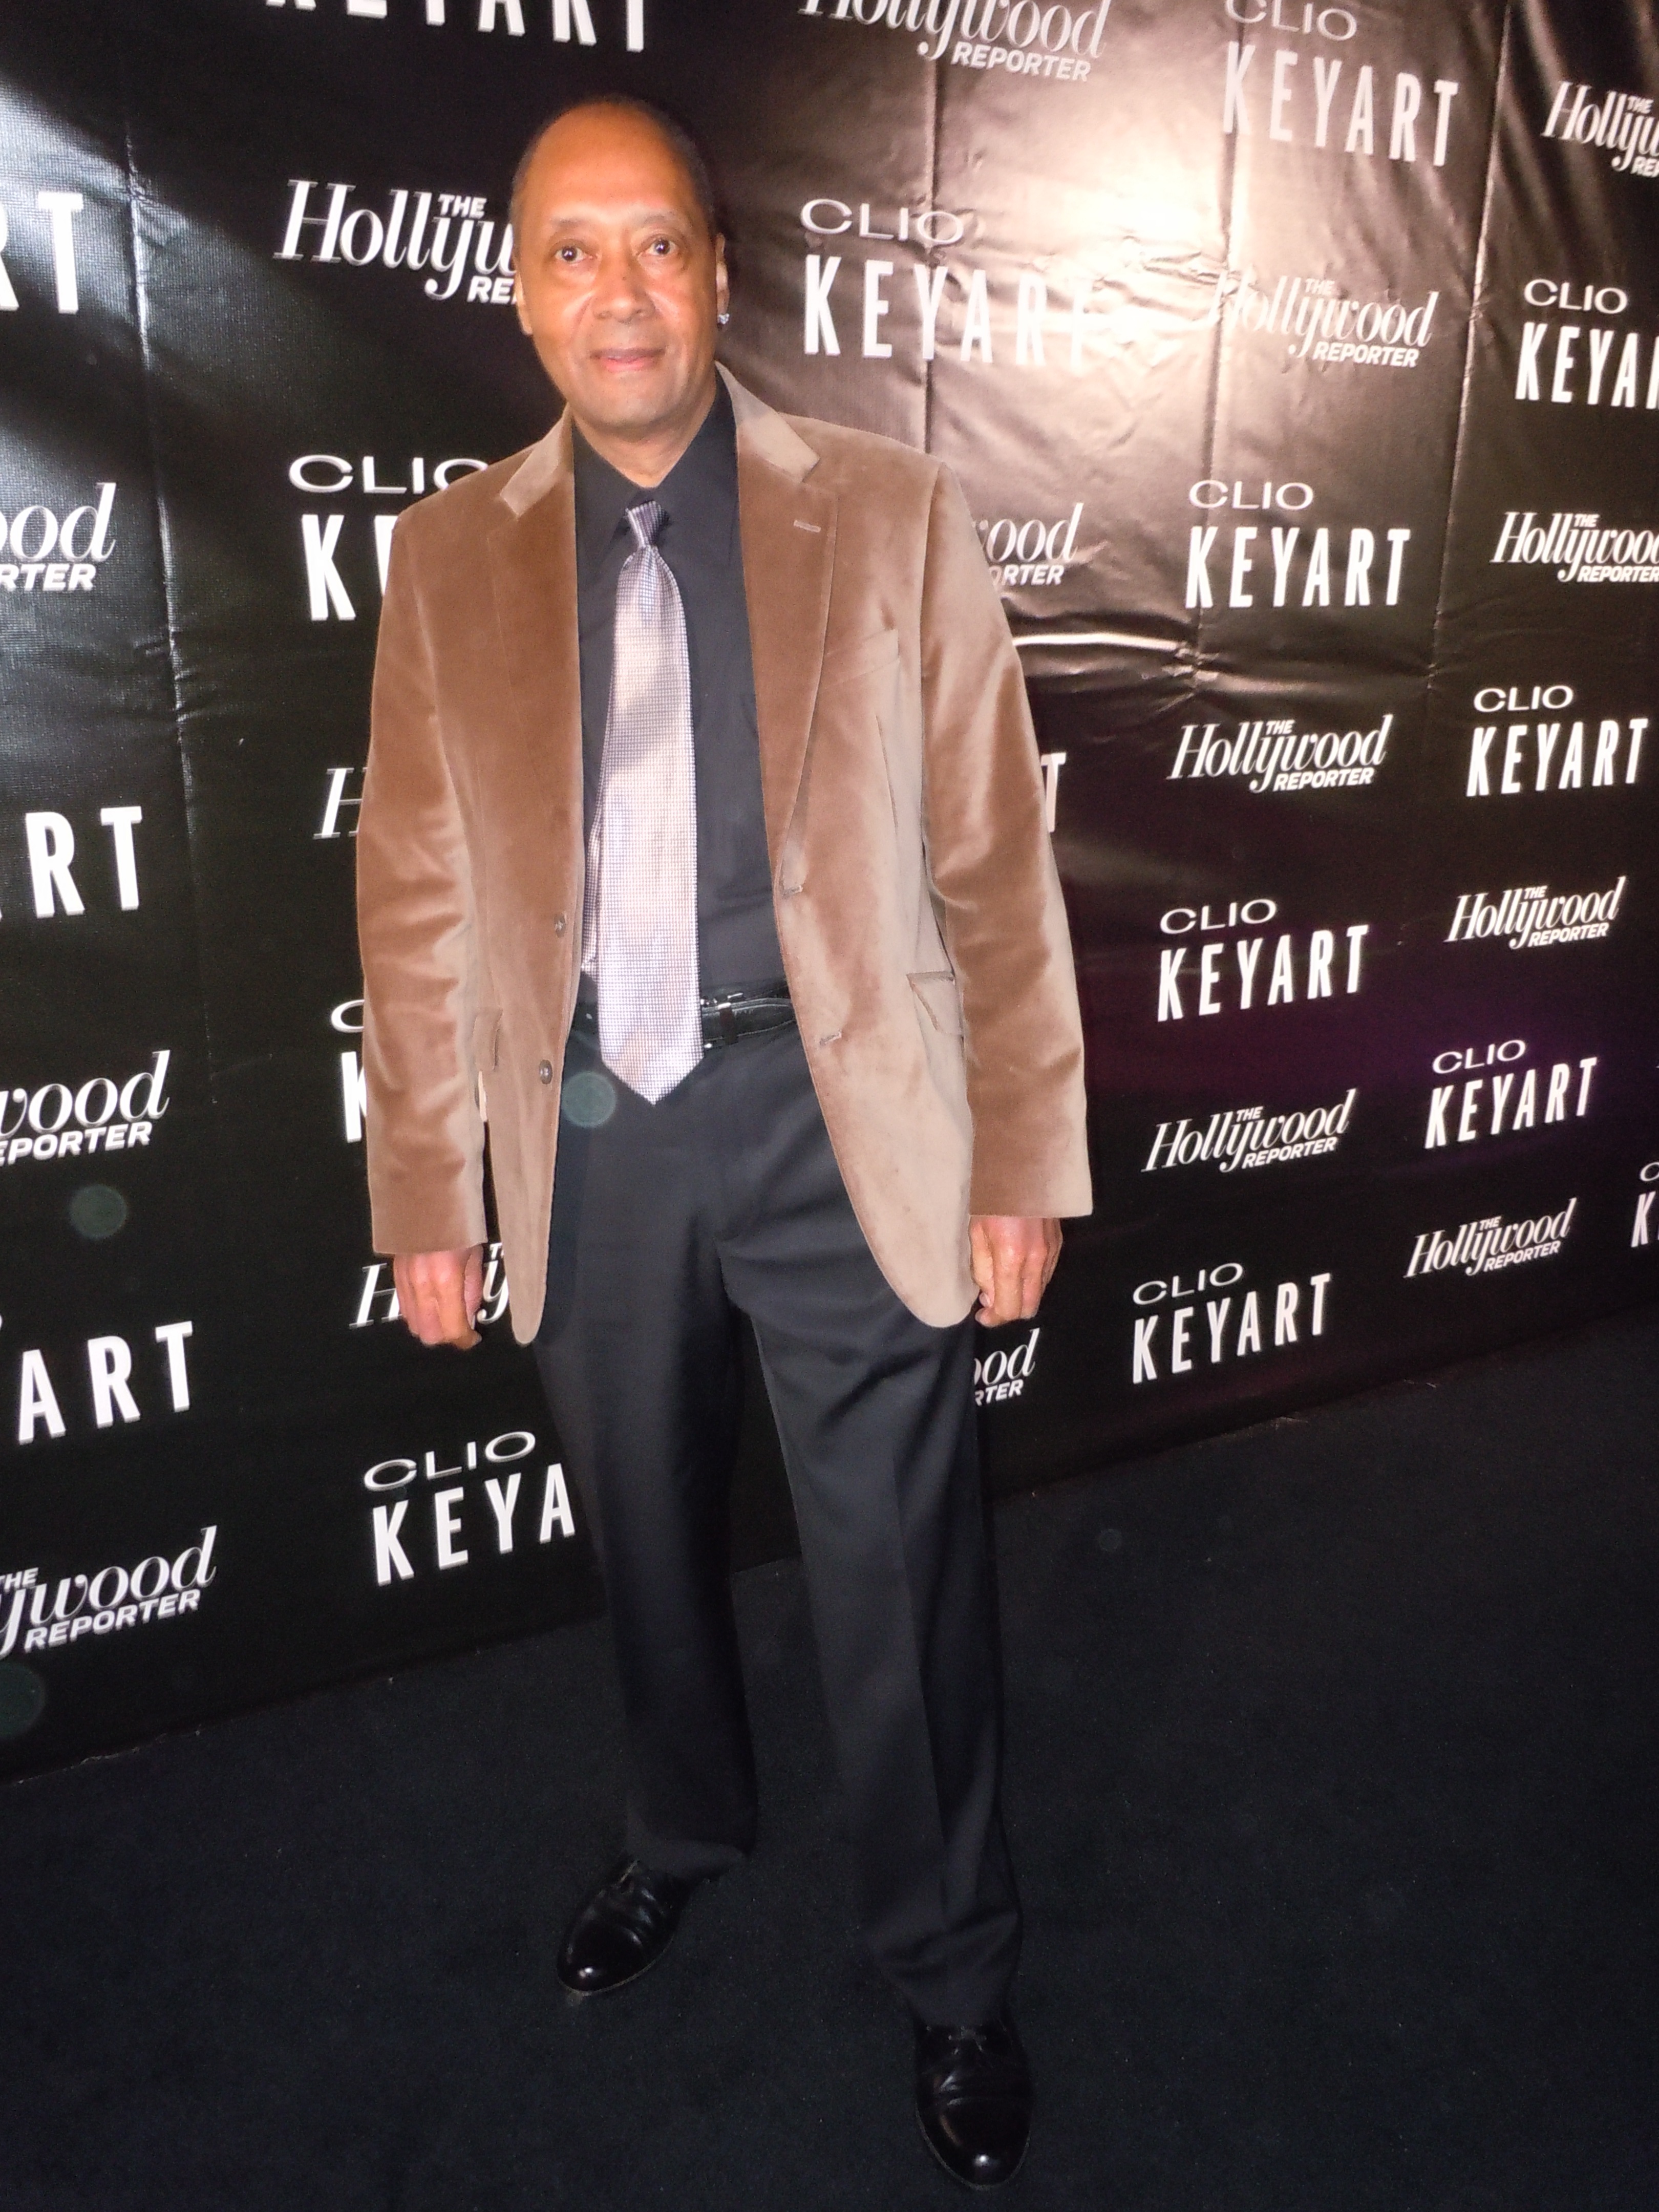 Jimmy at The CLIO Key Art Awards Ohm afterparty. (October 22, 2015)